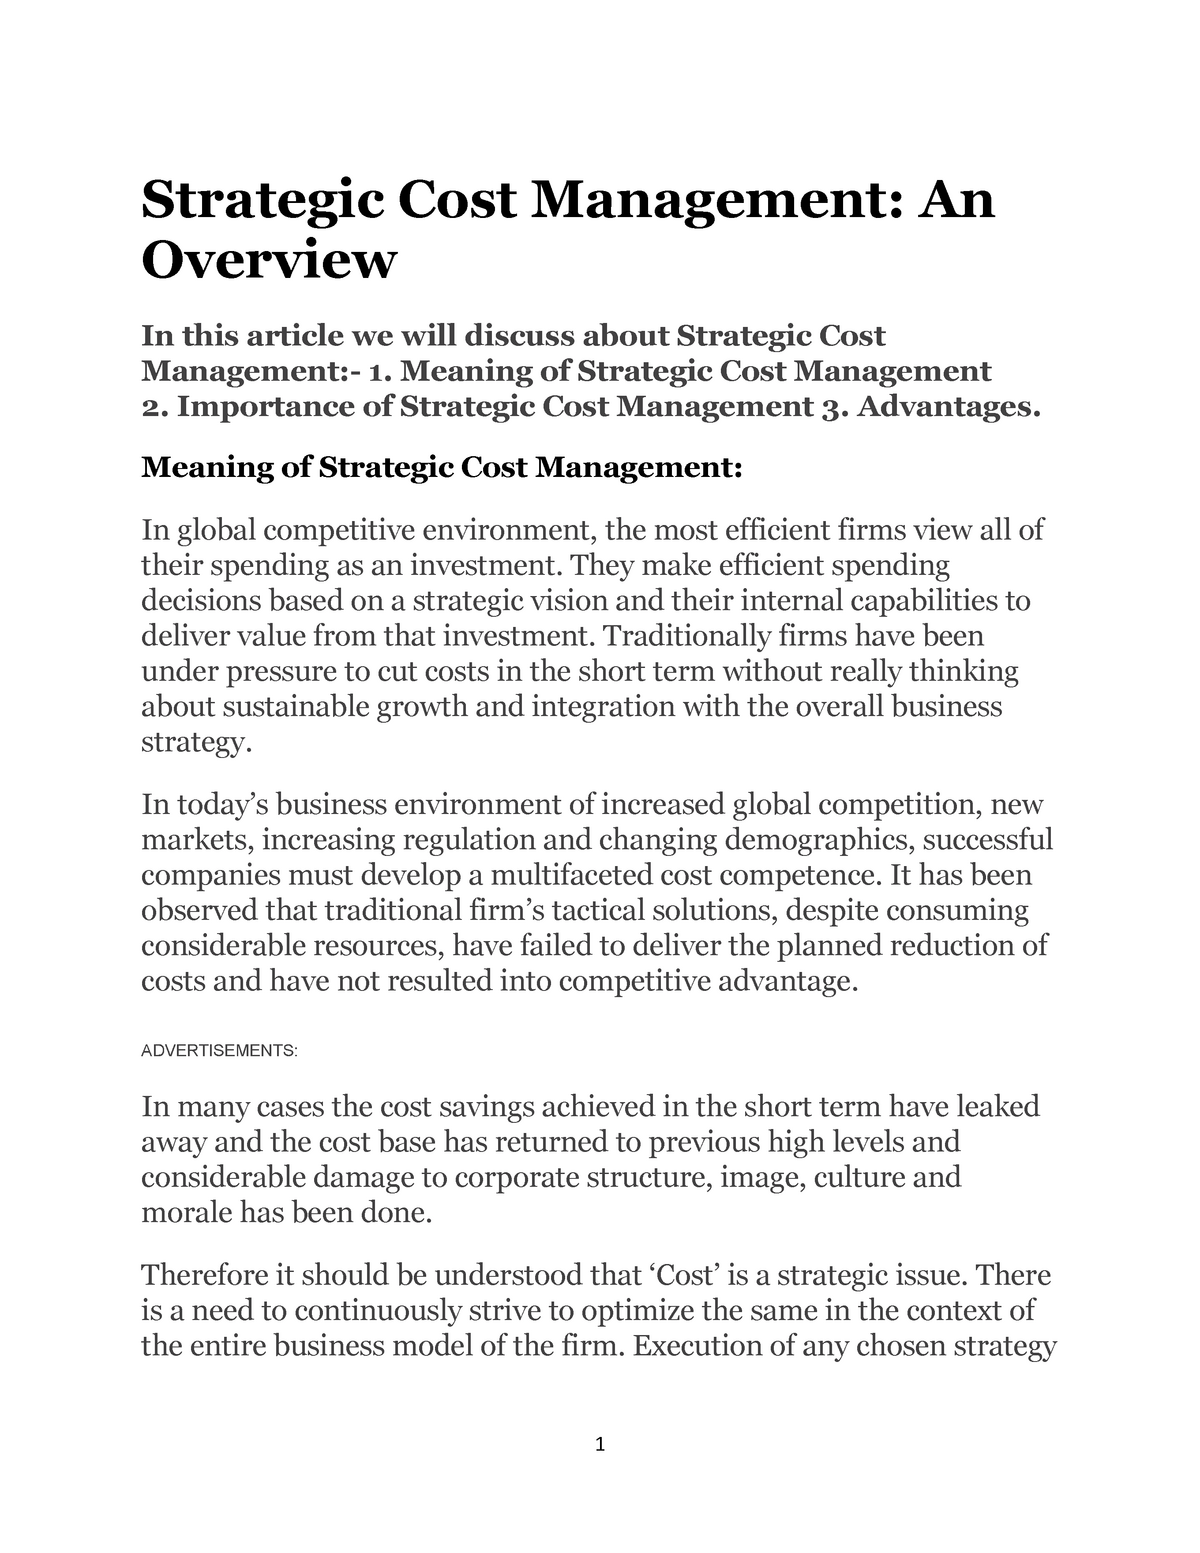 strategic cost management nmims assignment